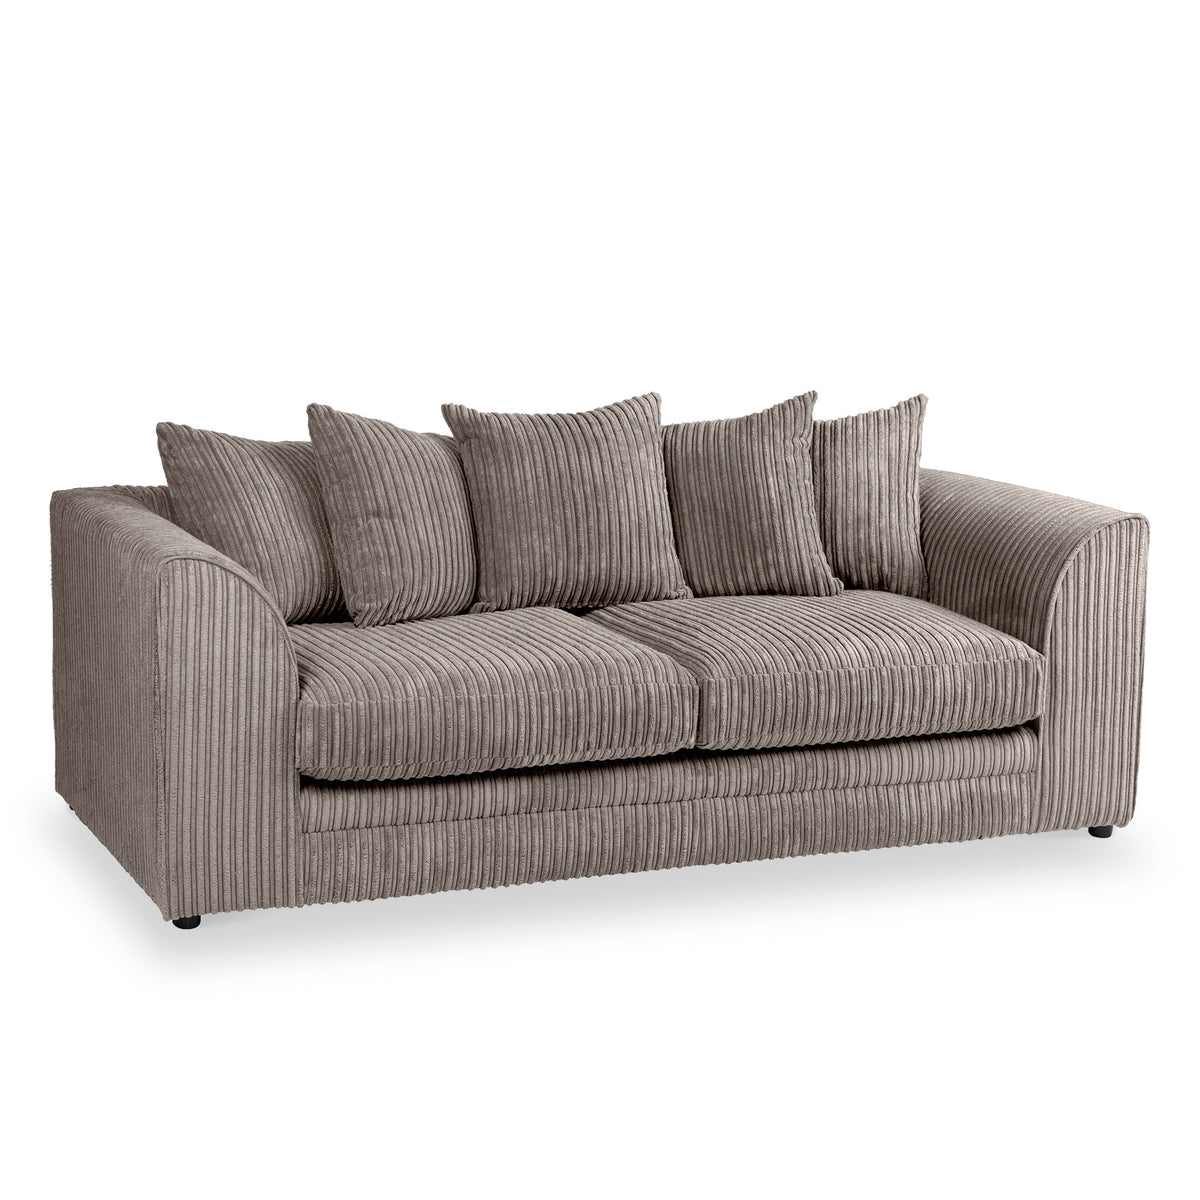 Bletchley Charcoal  Jumbo Cord 3 Seater Couch from Roseland Furniture